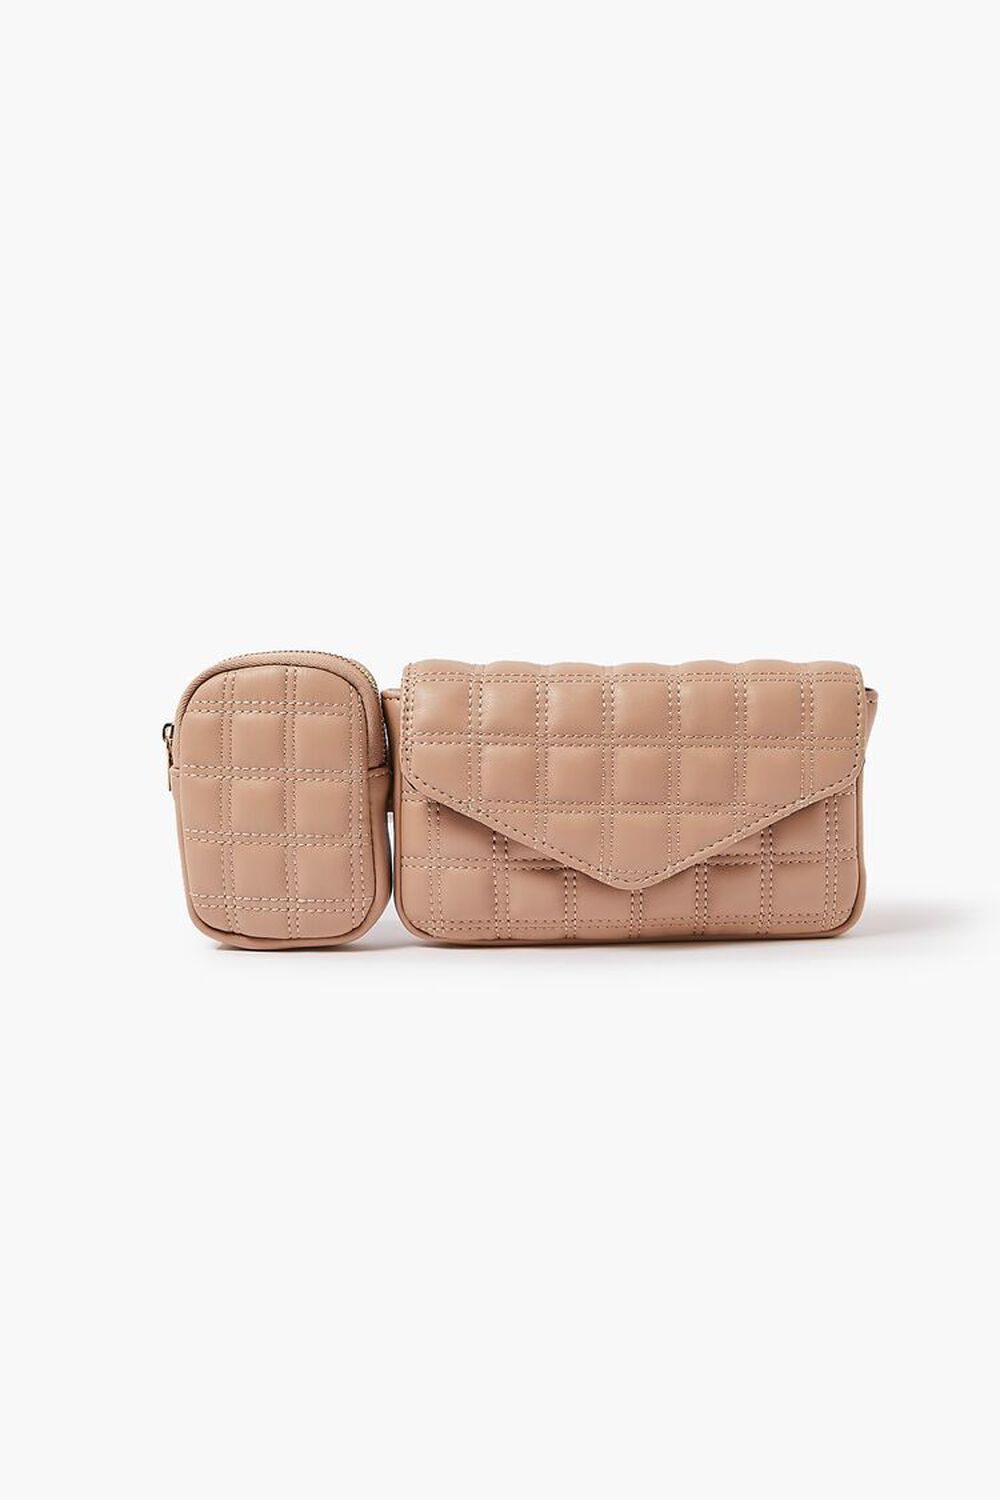 NUDE Quilted Faux Leather Fanny Pack, image 1